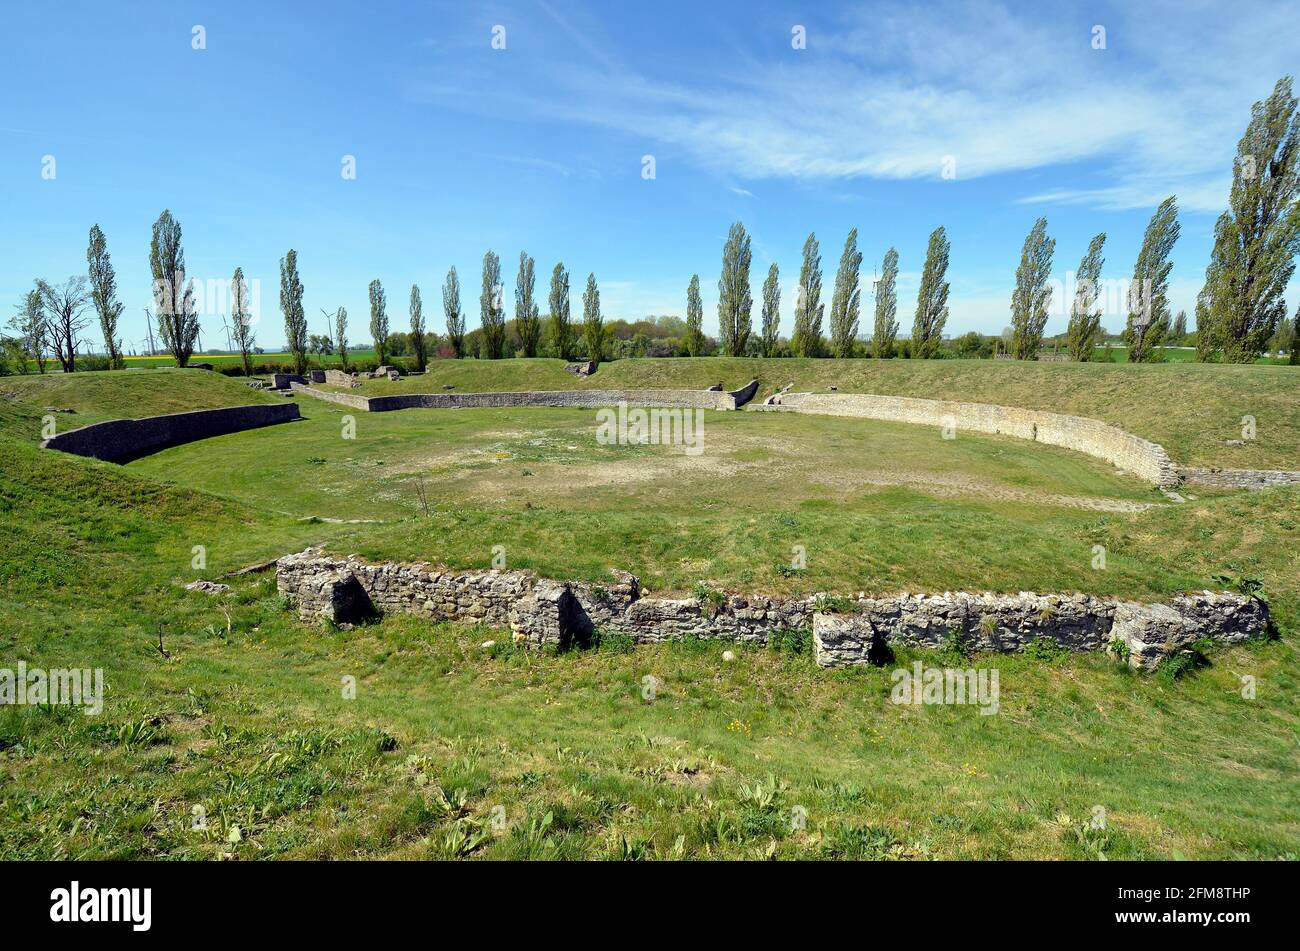 Austria, ancient amphitheater in the former legionary fortress Carnuntum, now located in the village of Petronell in Lower Austria Stock Photo